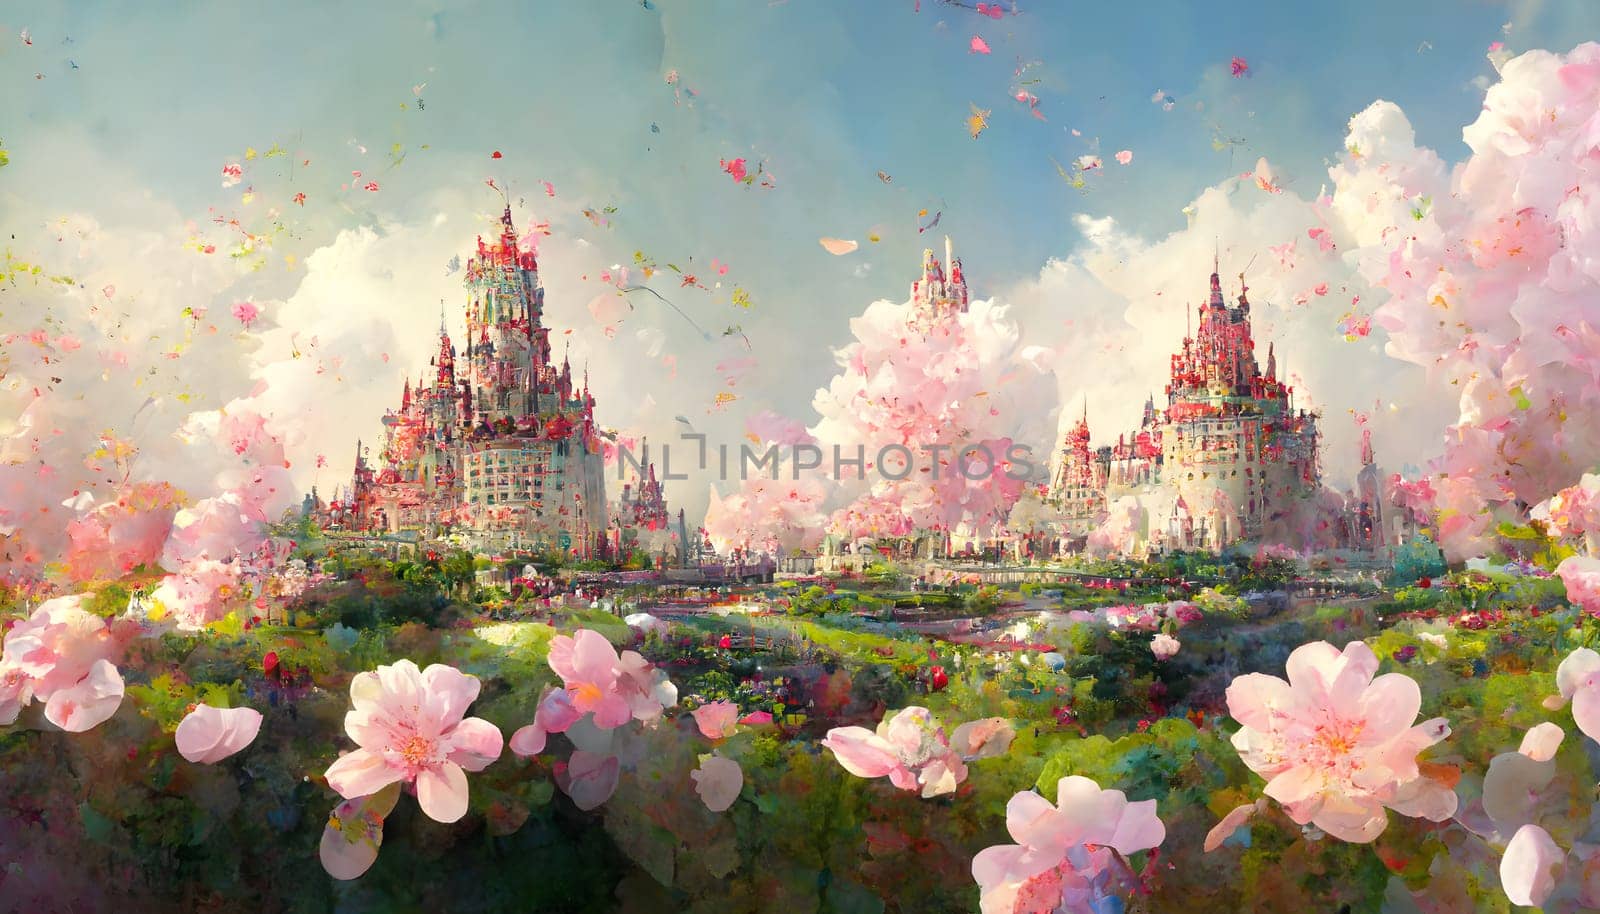 dreamy castles at sunny spring day with pink flowers in foreground, neural network generated art by z1b